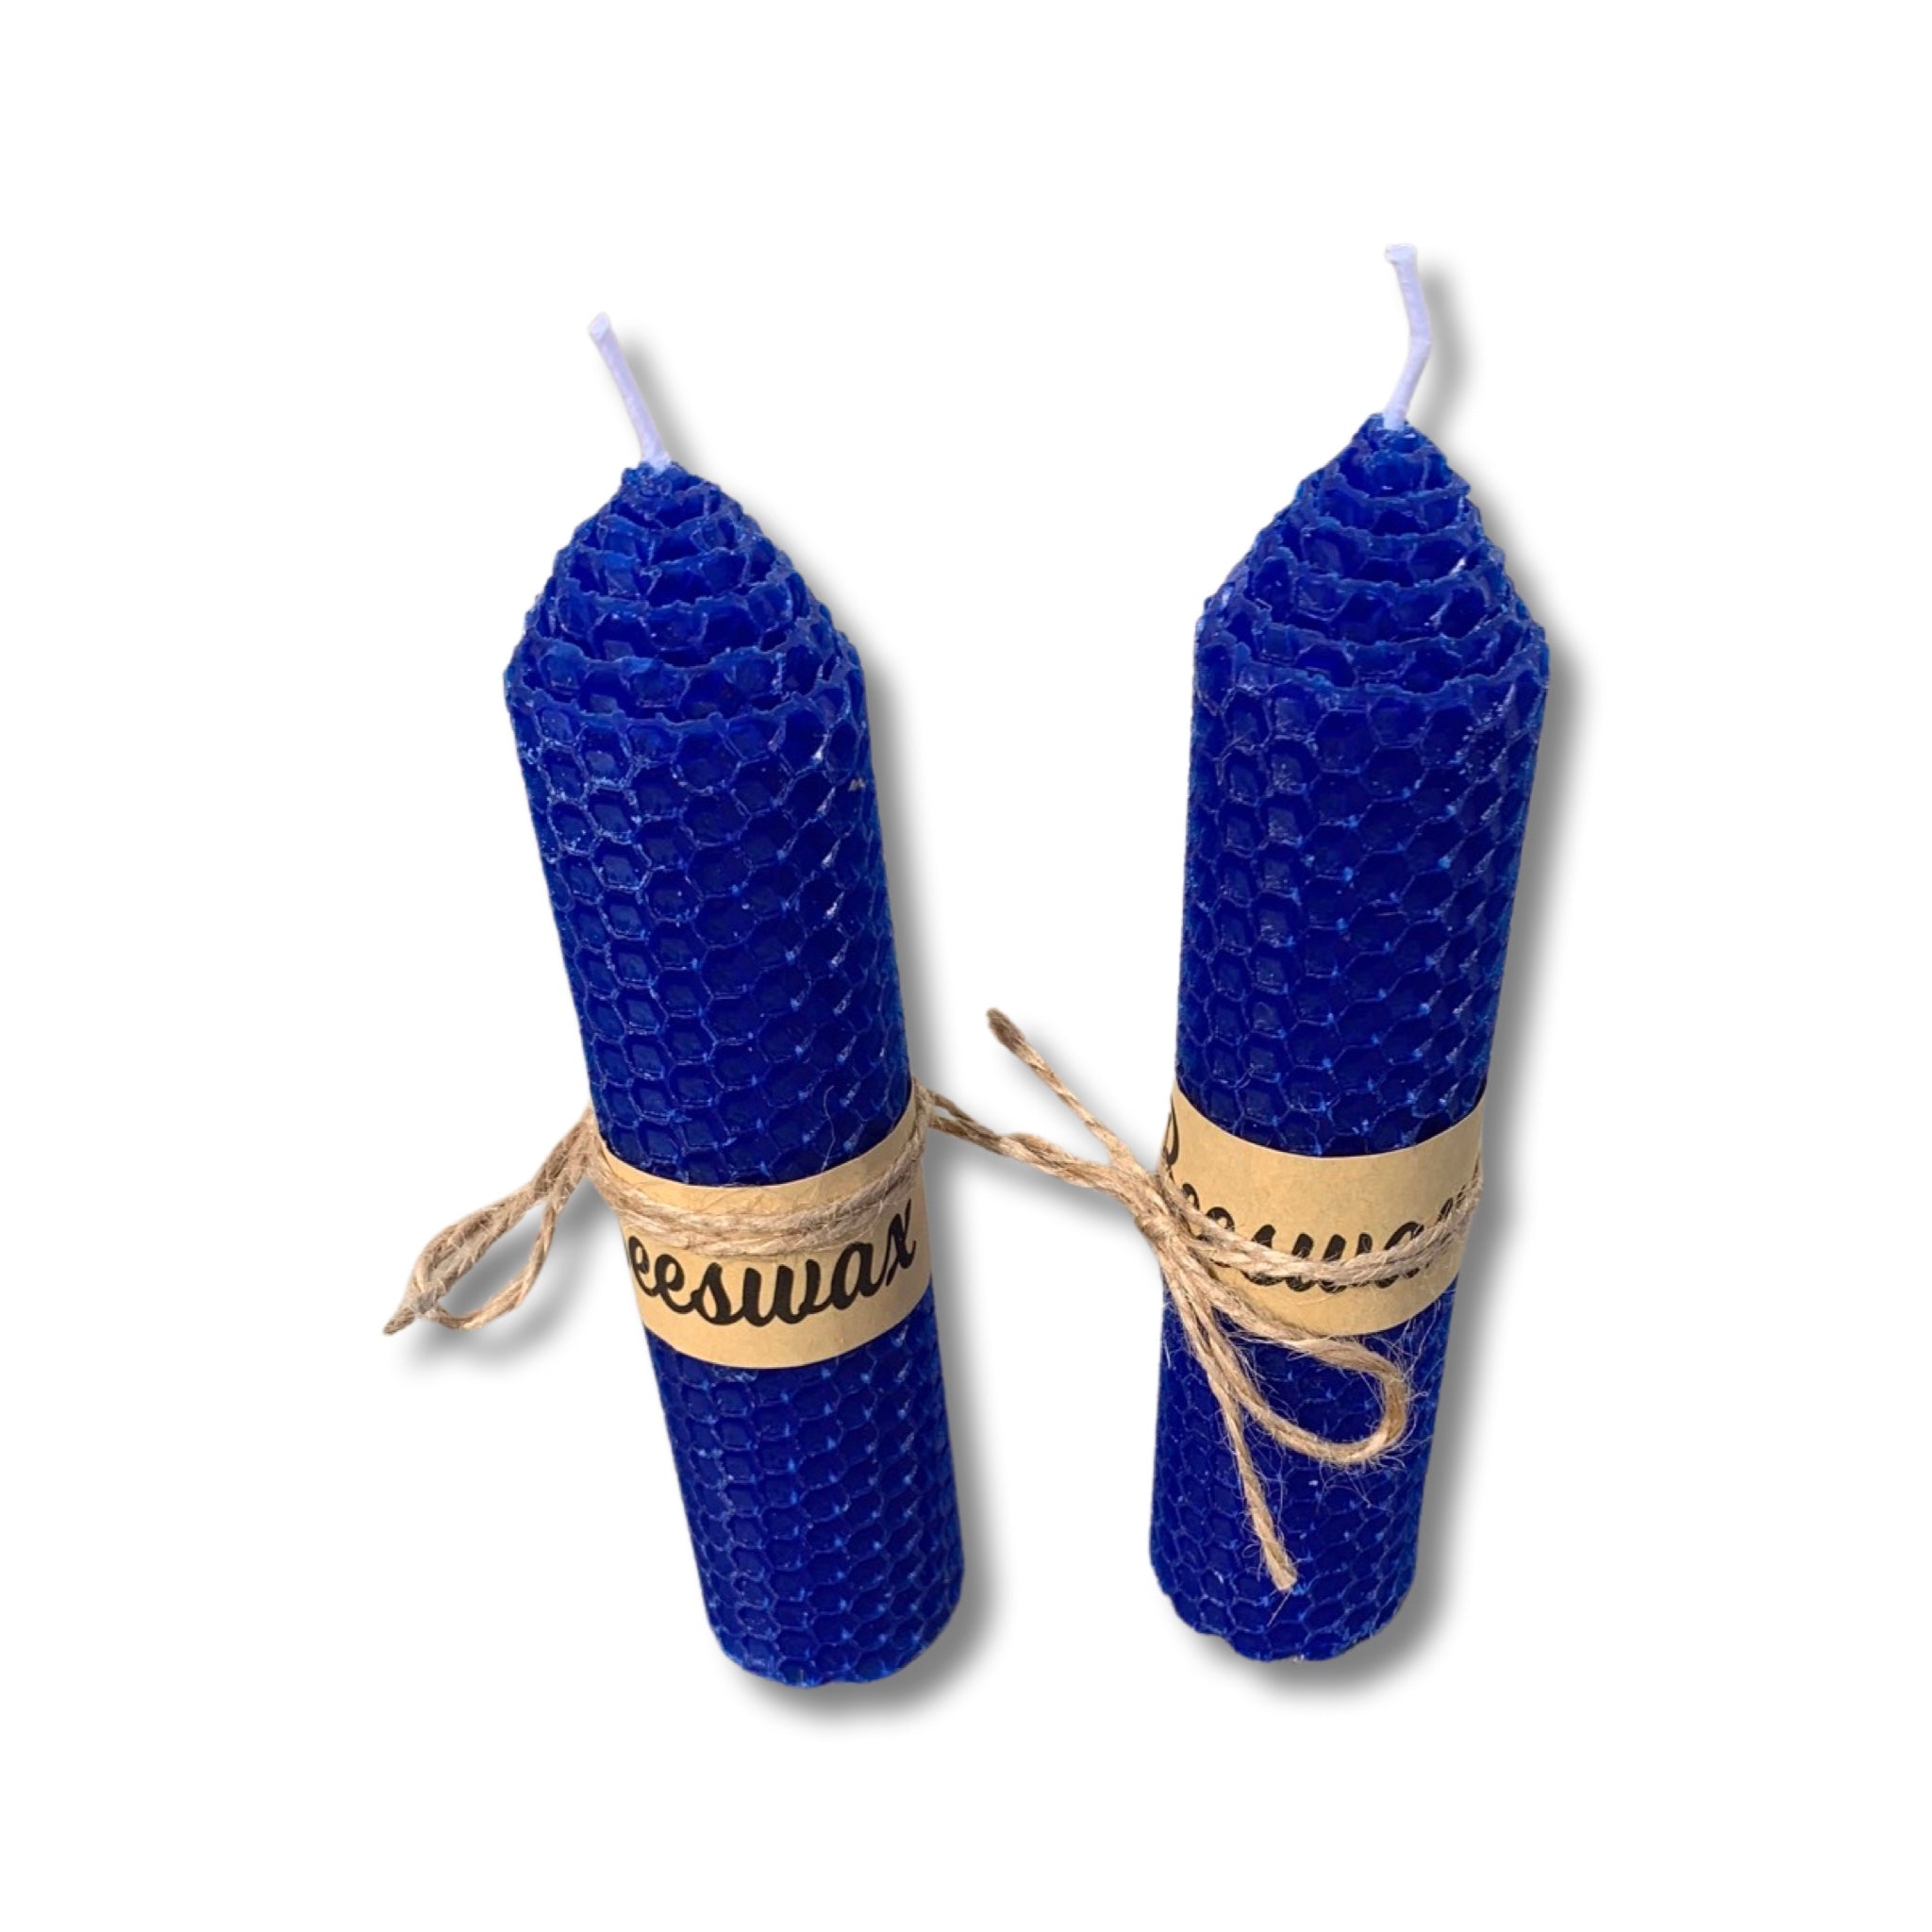 Rolled Beeswax Candle 2 pack